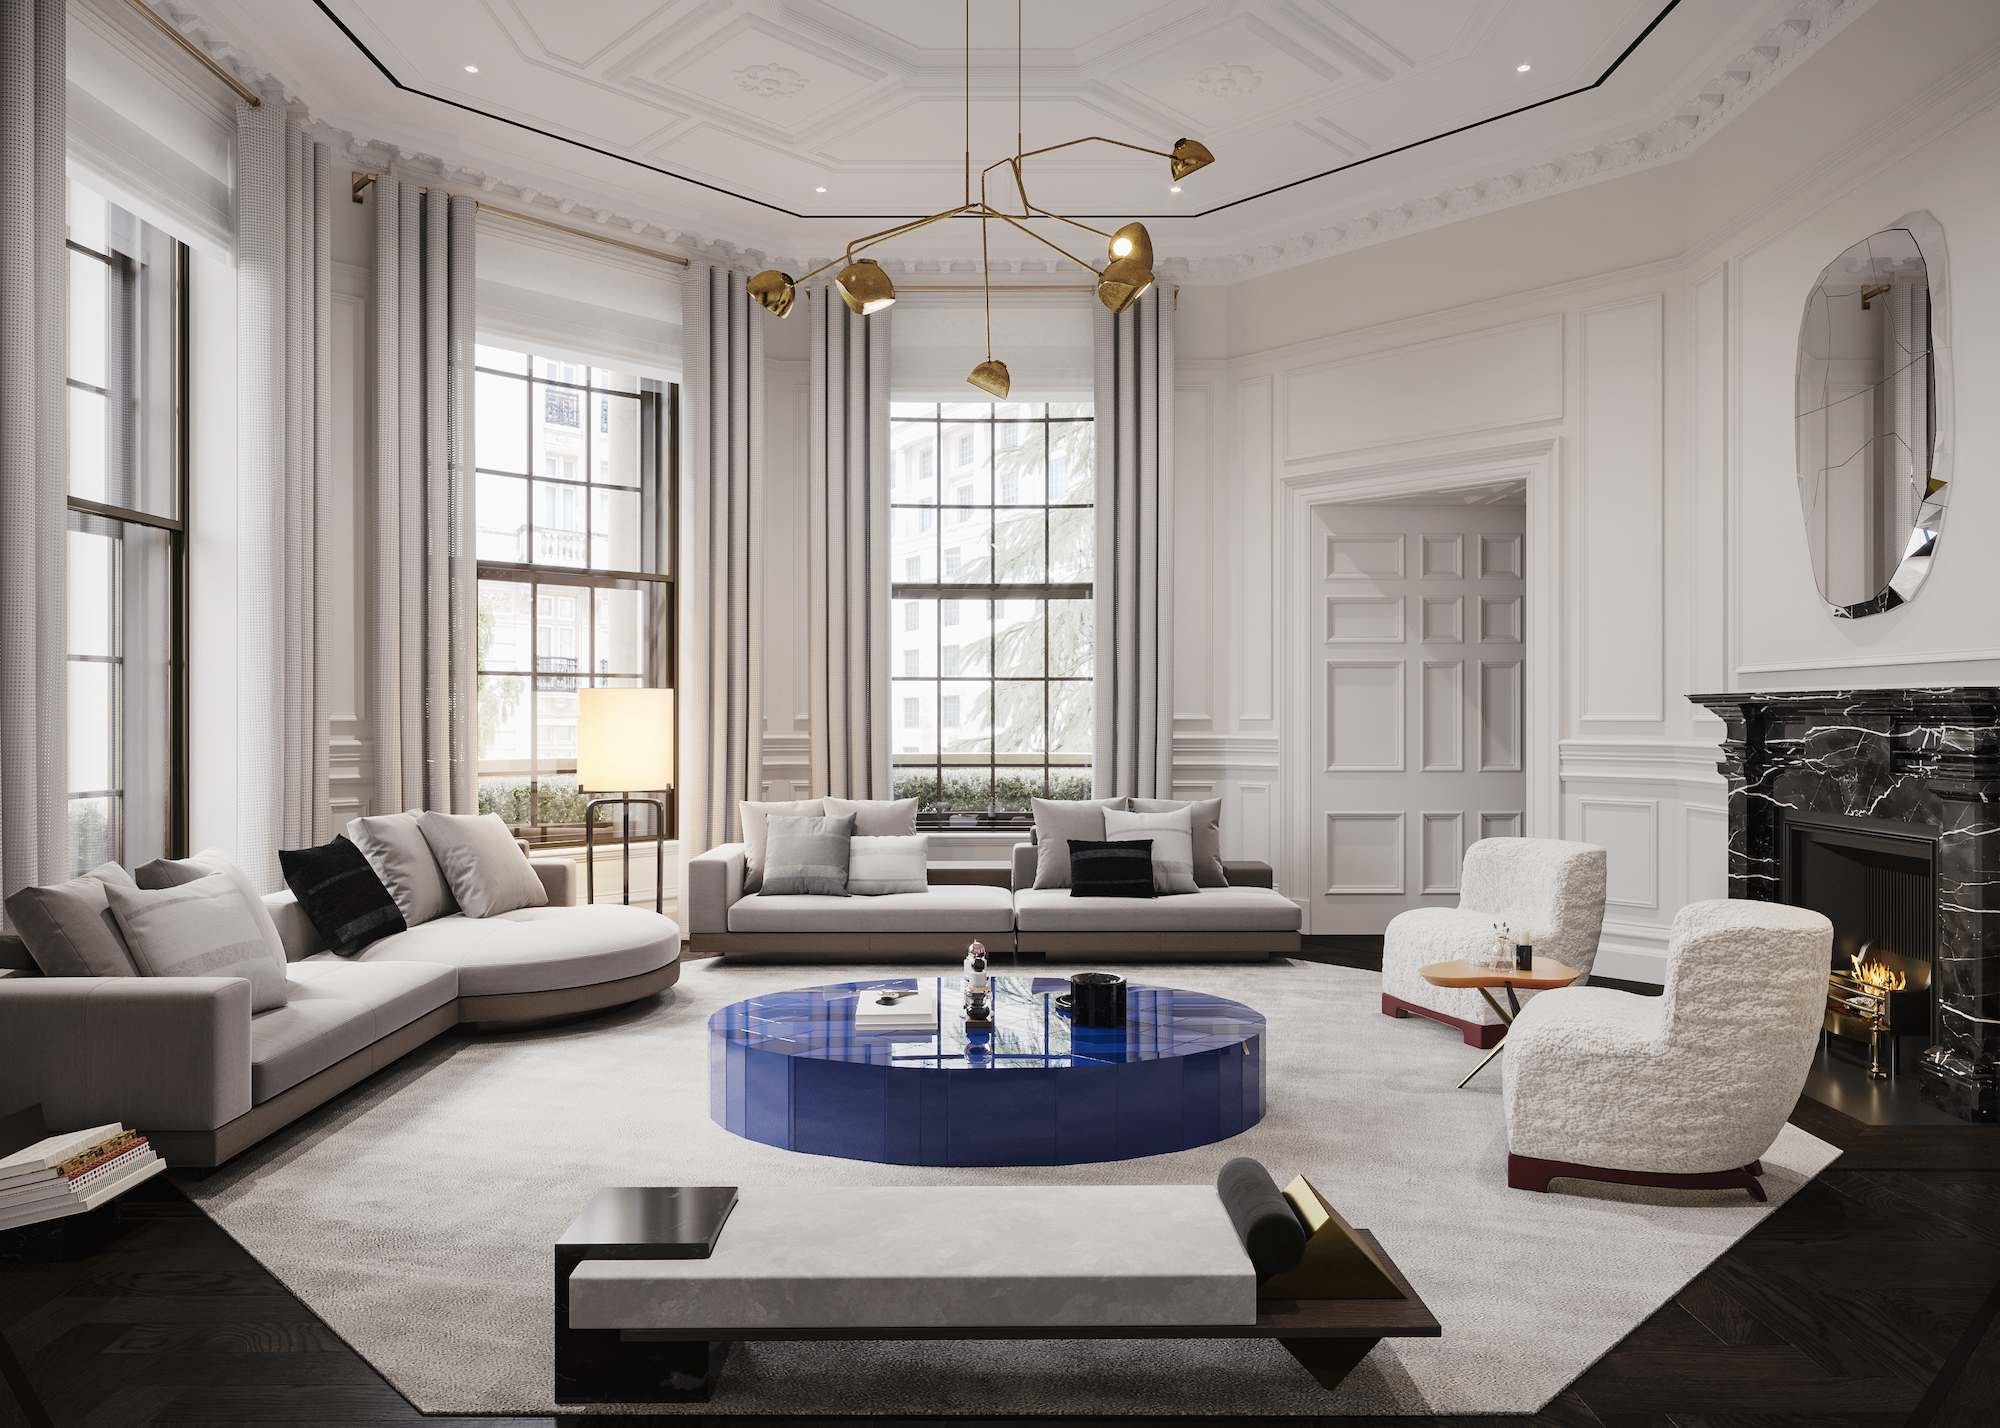 Reception room at OWO residence, interior designed by 1508 London in Effect Magazine